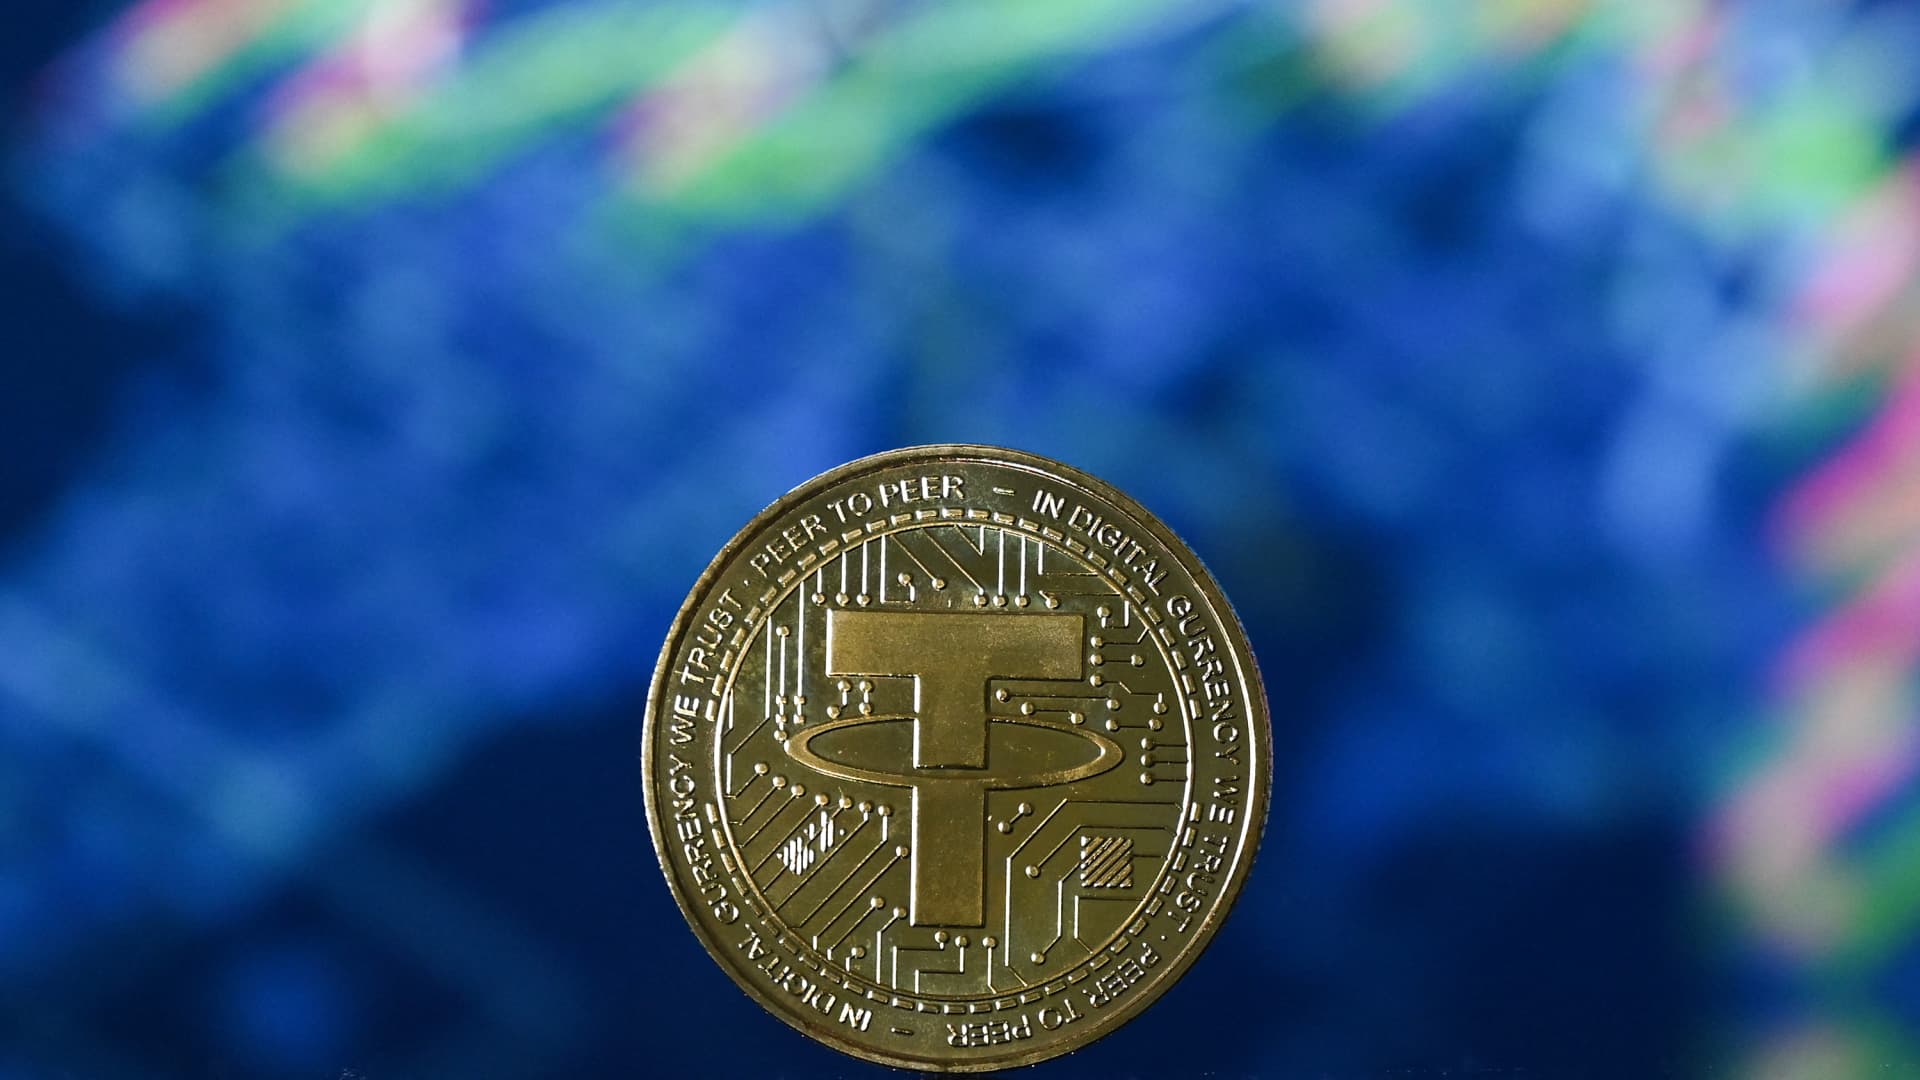 Tether claims its stablecoin is now partially backed by non-U.S. government bonds